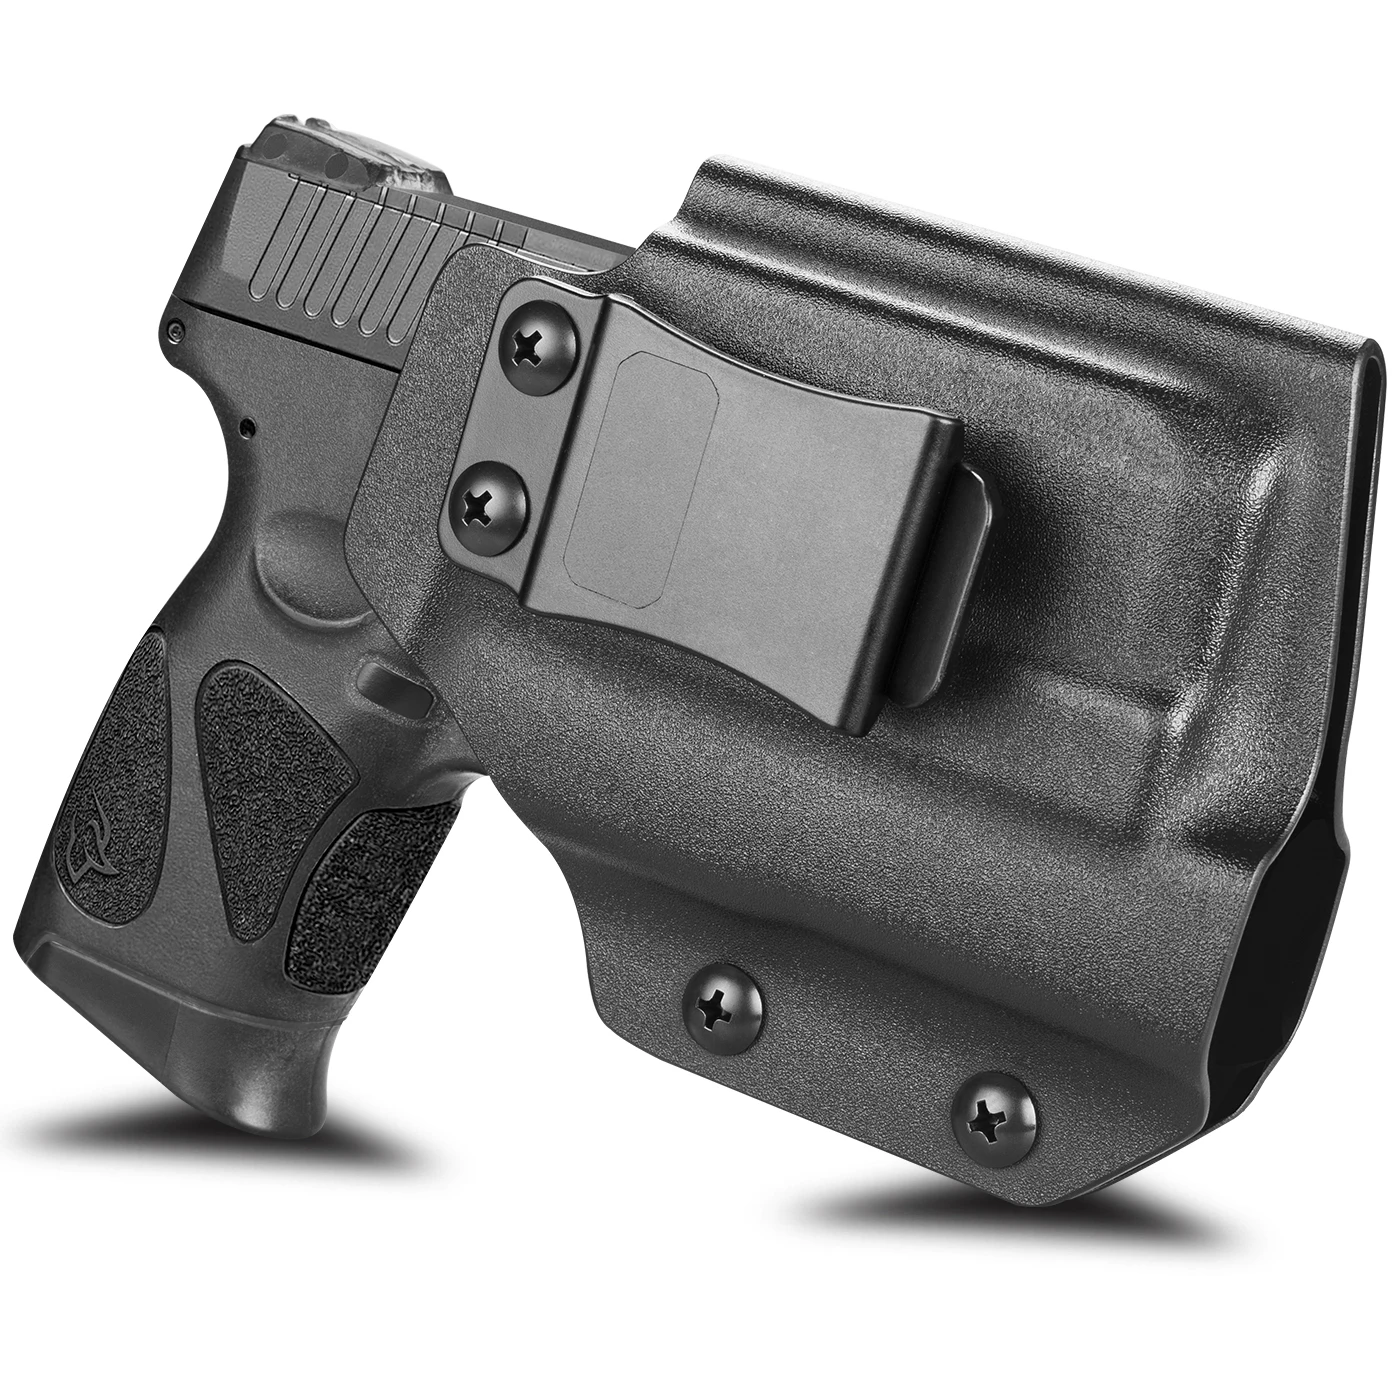 

Gun&Flower IWB Kydex Holster Fits for Taurus G3C Bearing Olight PL Mini 2 Valkyrie and Red Dot Right Hand Available